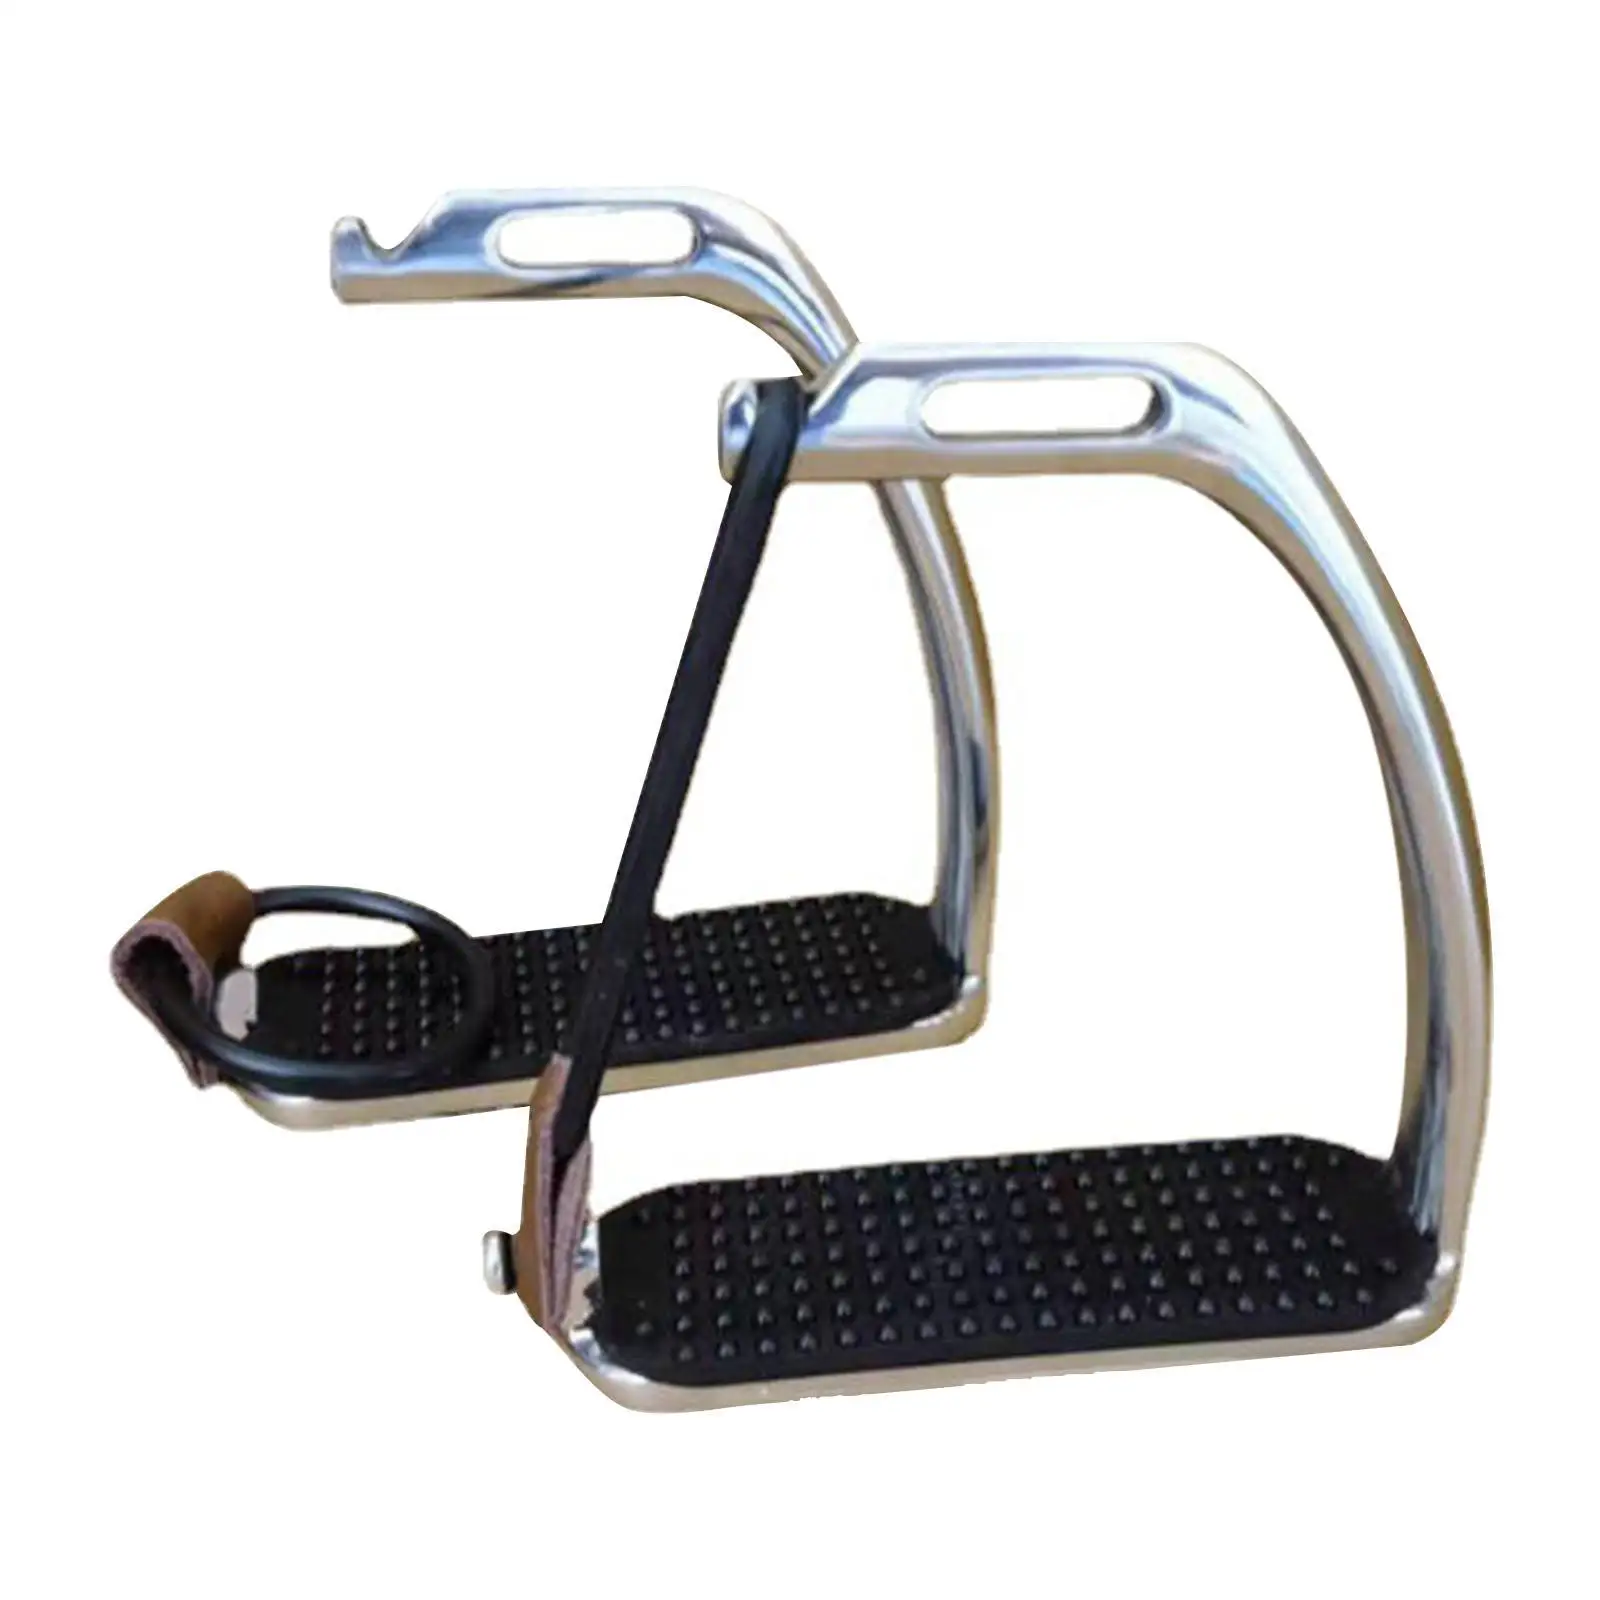 2Pieces Training Tool Horse Pedal Horse Riding Stirrups English Riding Hose Saddle for Western Riding Racing Men and Women Kids